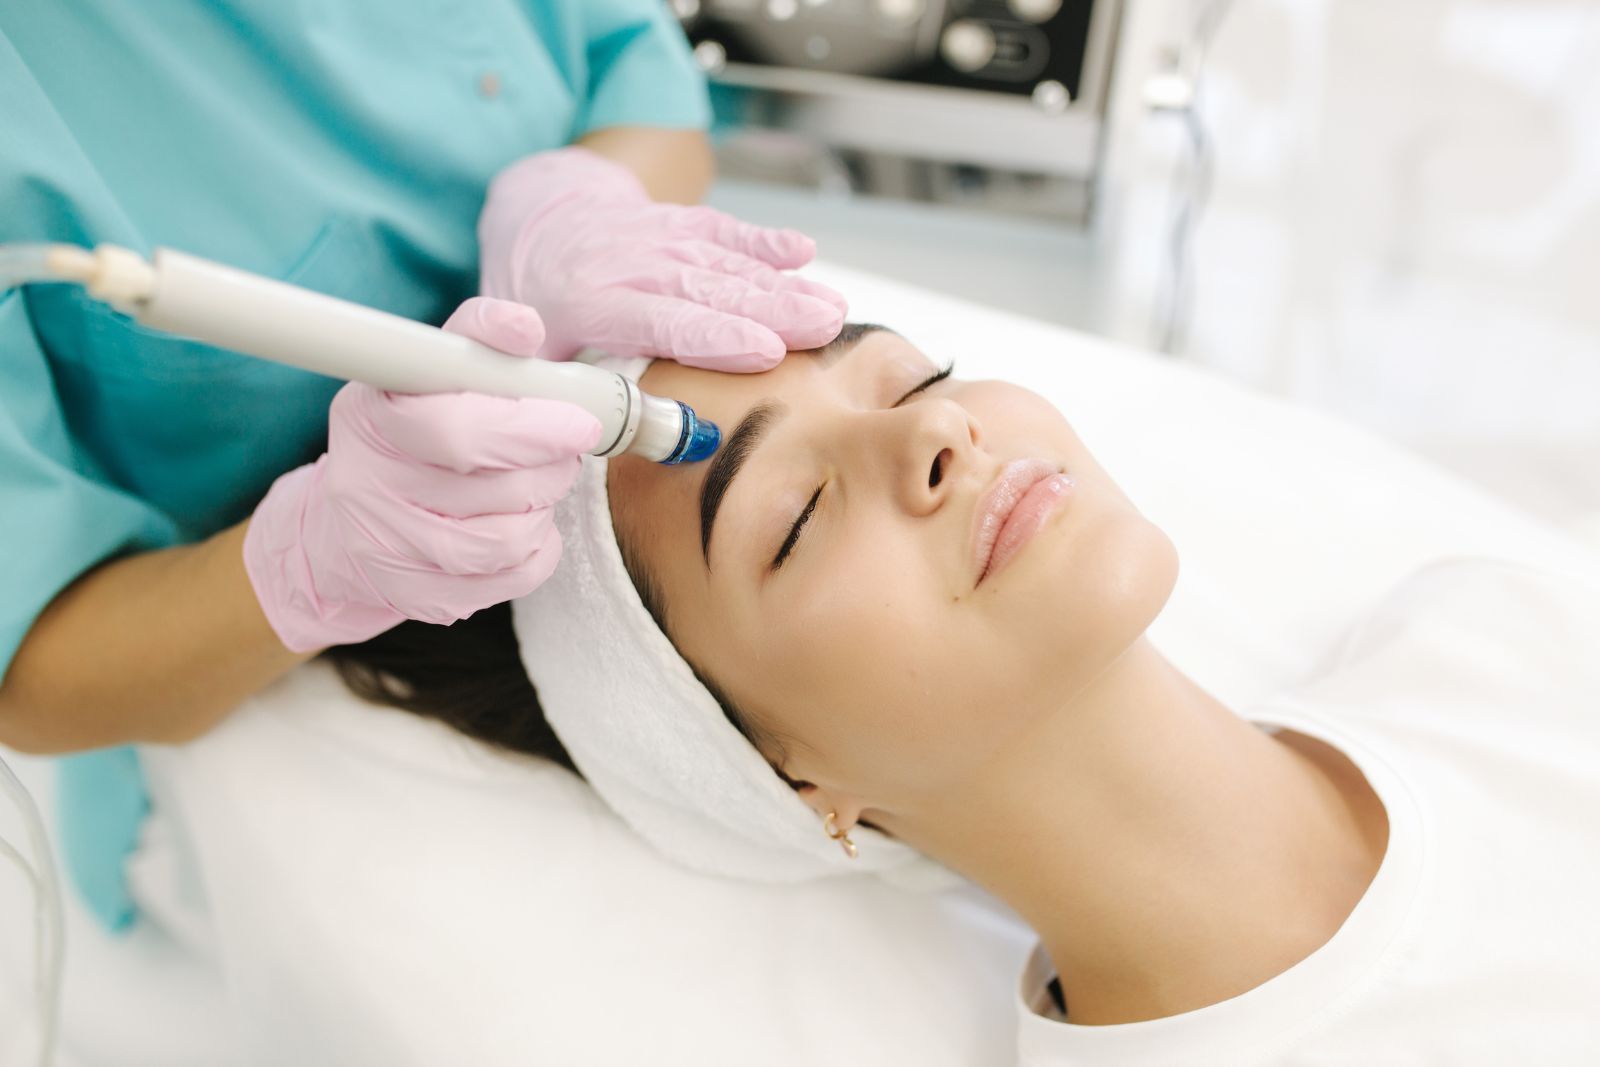 Aesthetician using a facial machine on a female client's face in a clinic, client appears relaxed.